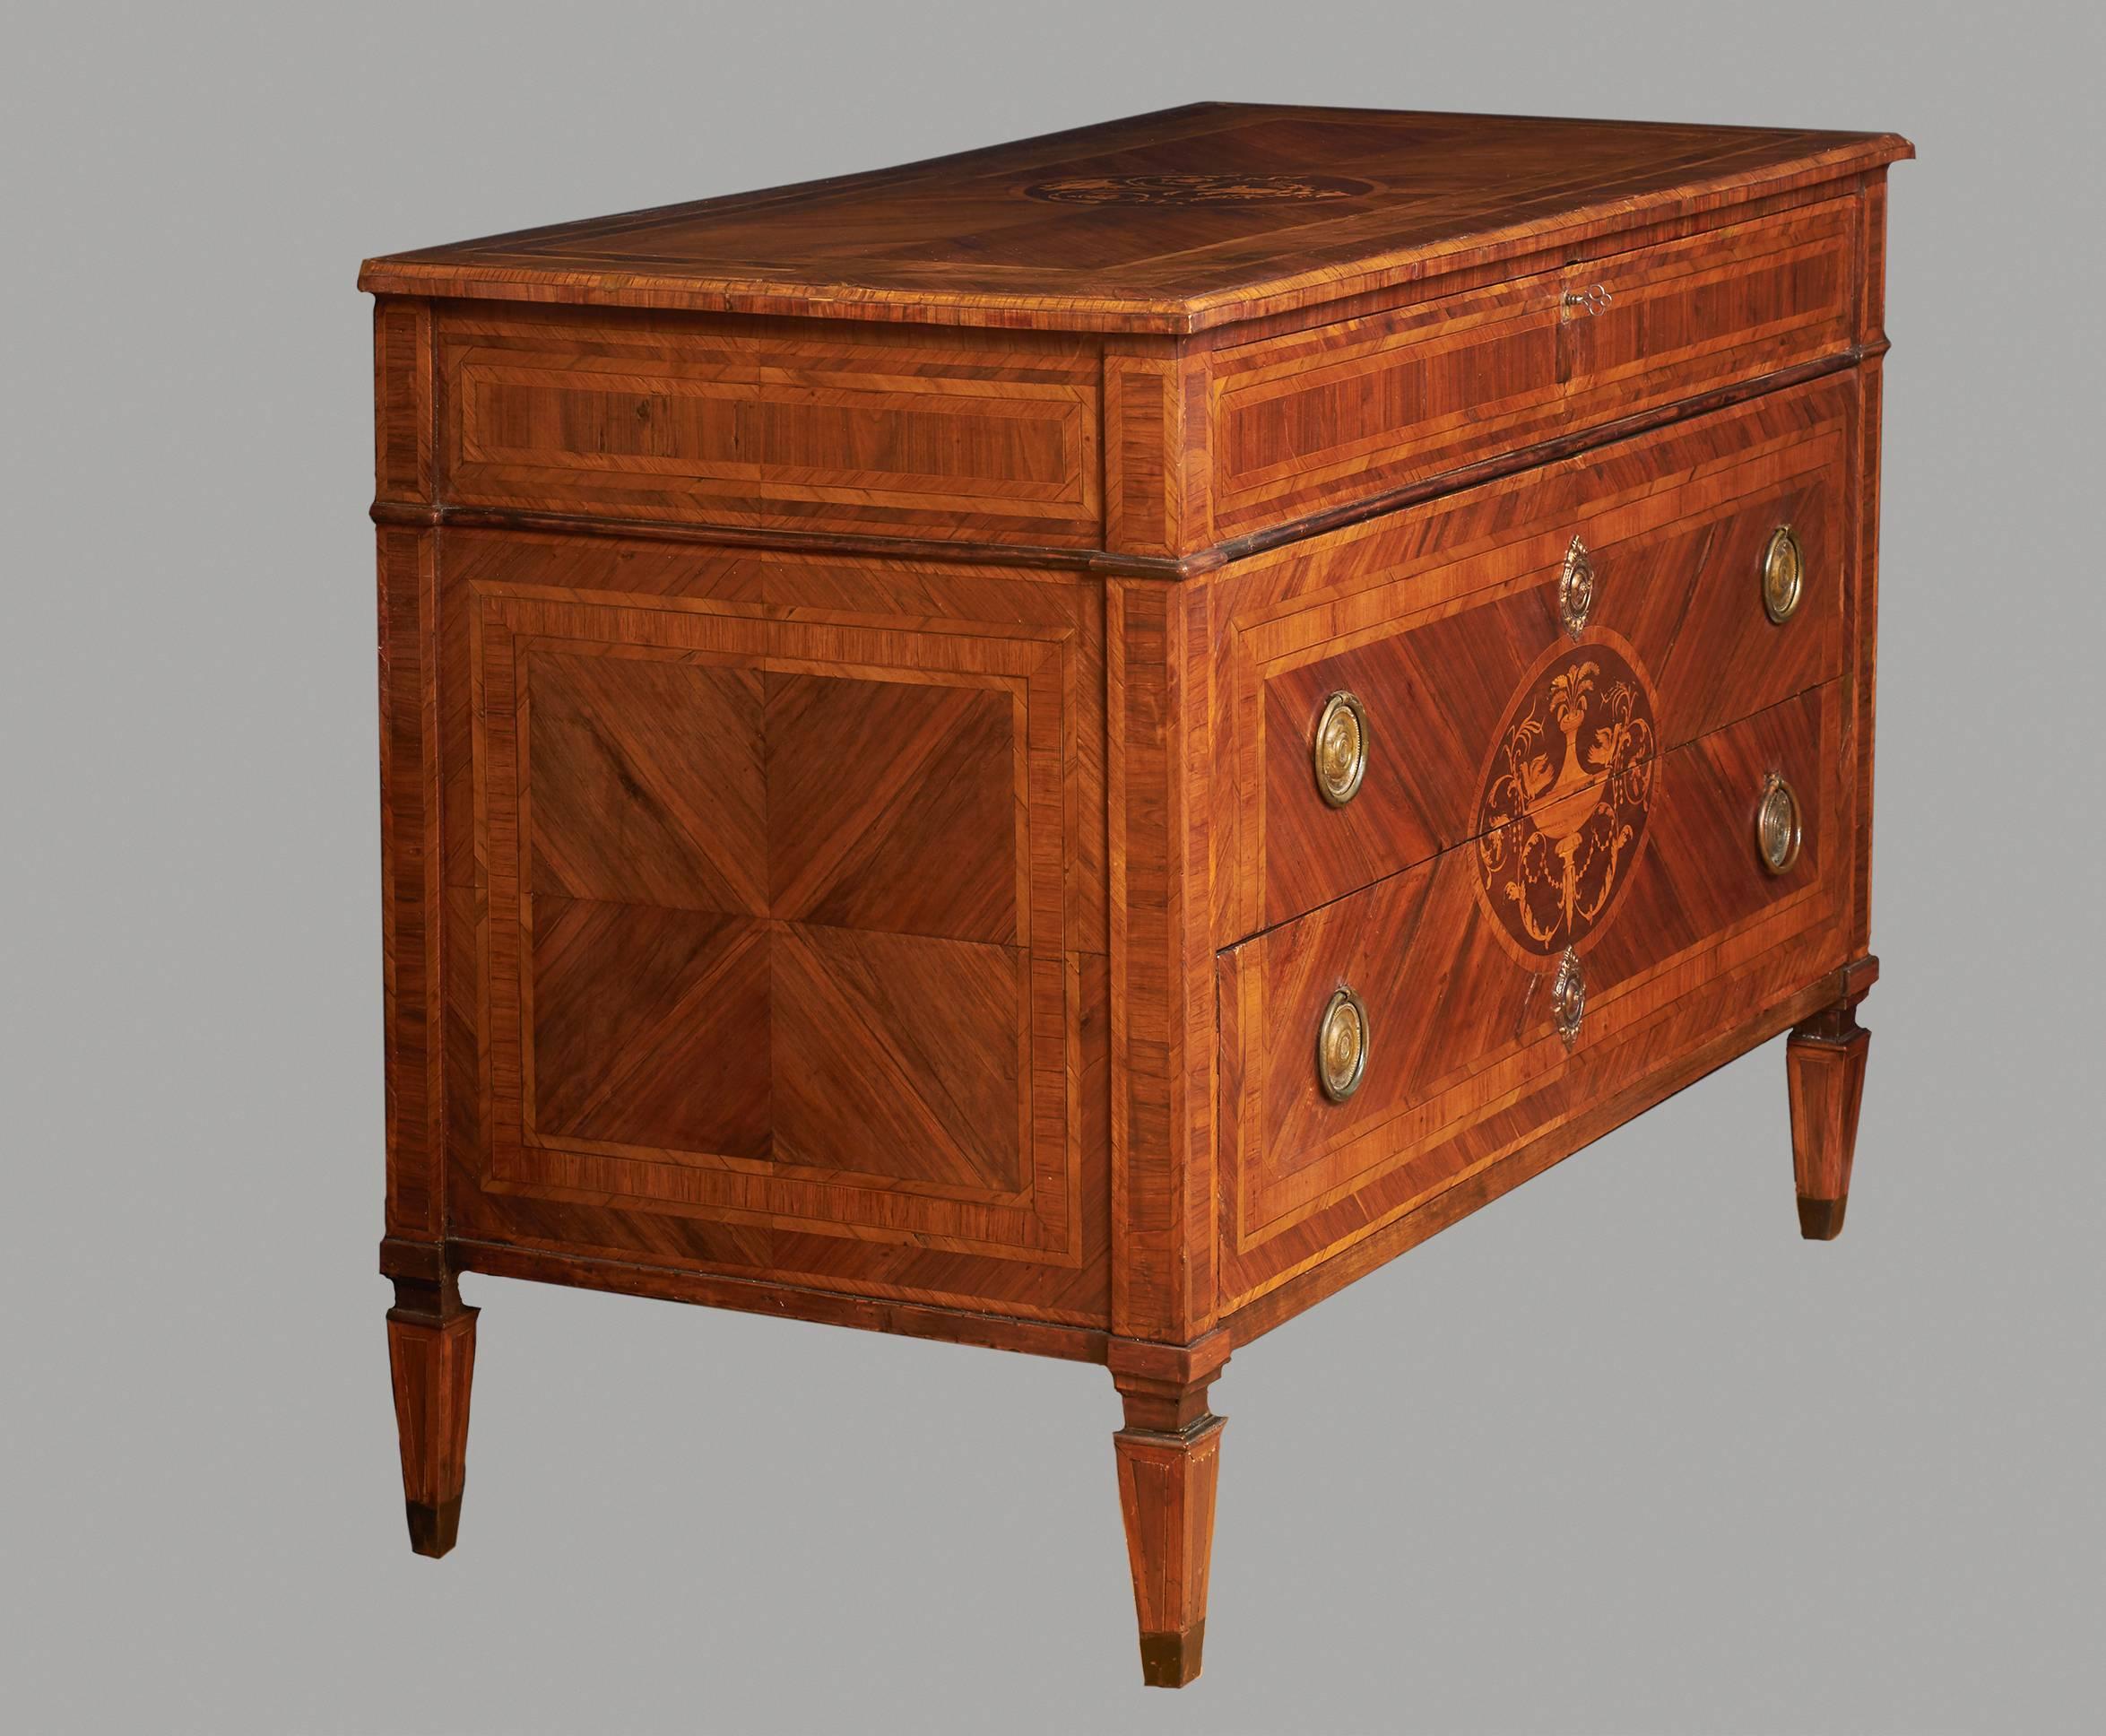 An Italian neoclassical inlaid walnut commode with one shallow and two deep drawers, the top with central foliate tulipwood, rosewood and kingwood inlay, the drawers with stylized urn inlay, circa 1790. Drawers now lined with old silk.